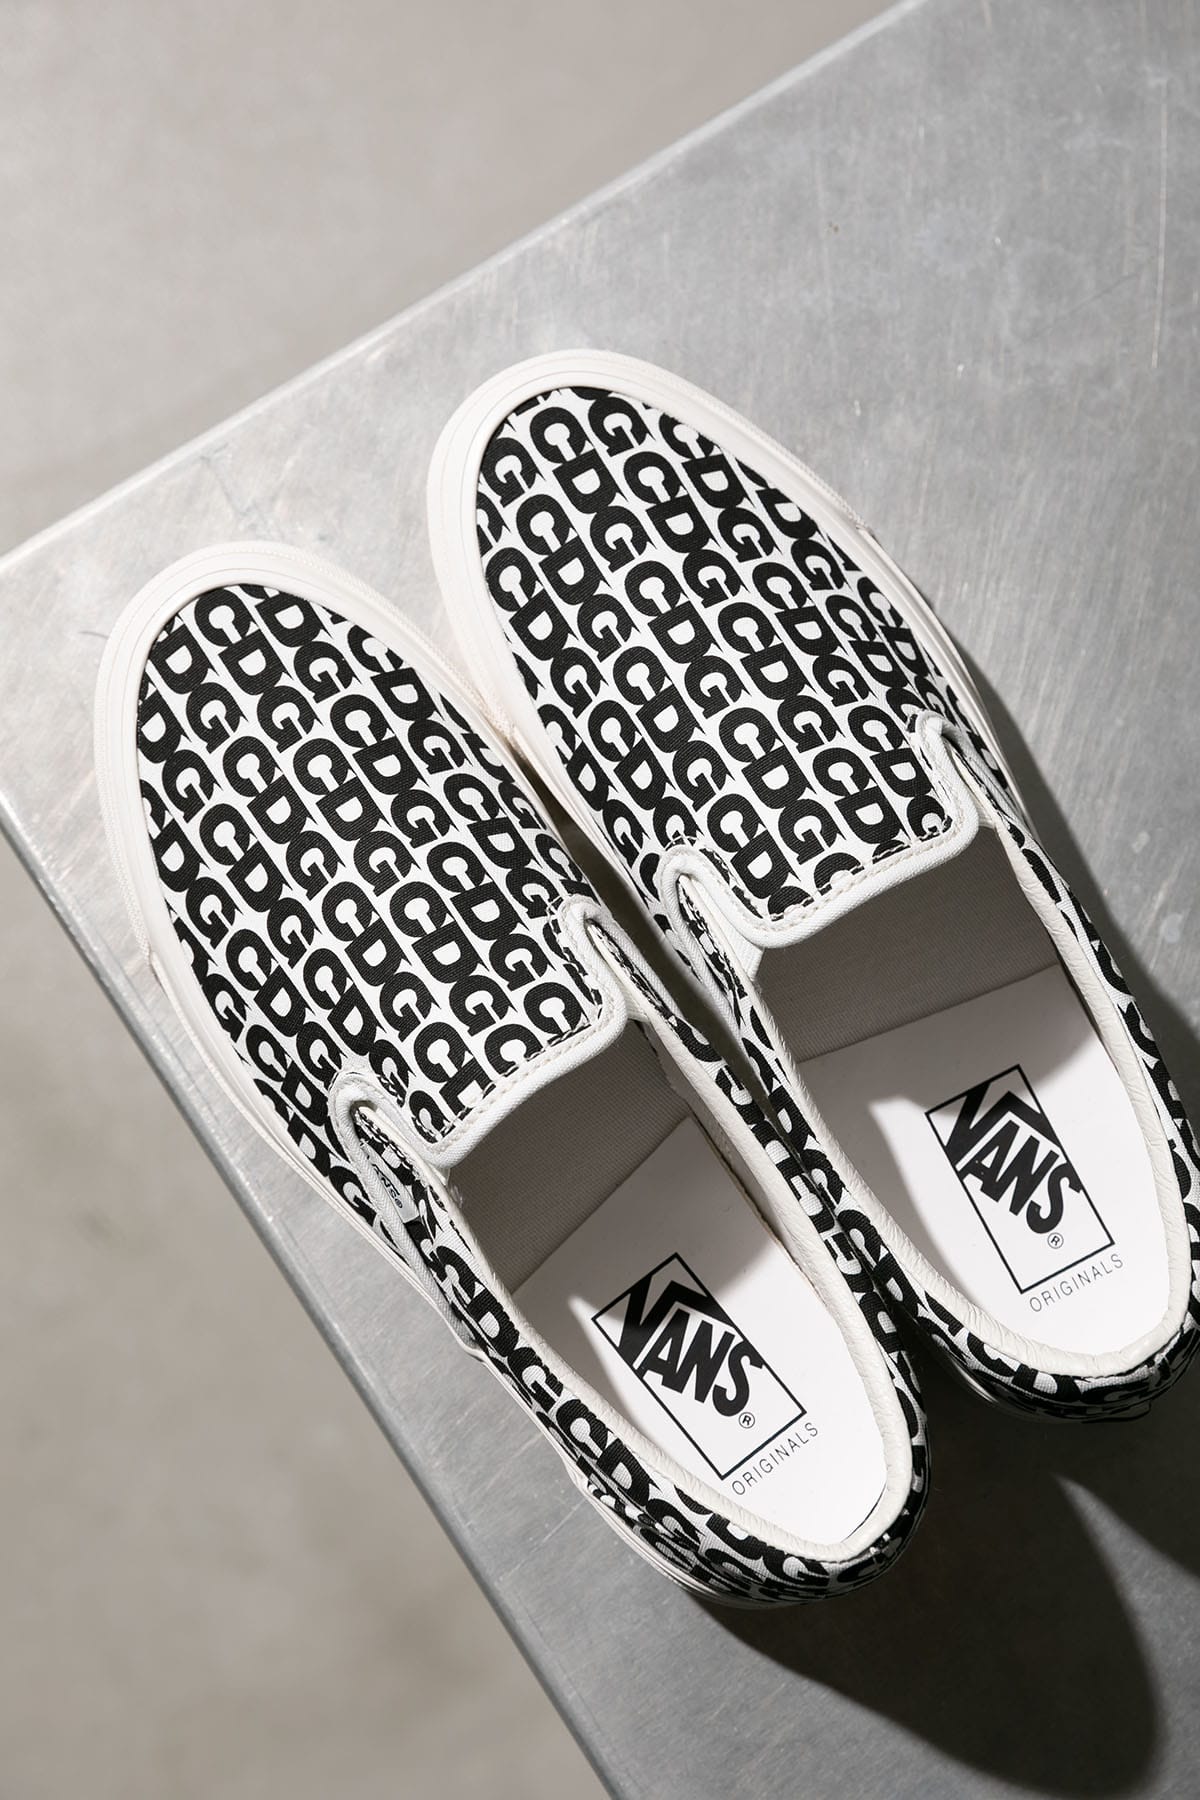 COMME des GARCONS CDG × VANS コラボ スリッポンお値段変更させていただきました